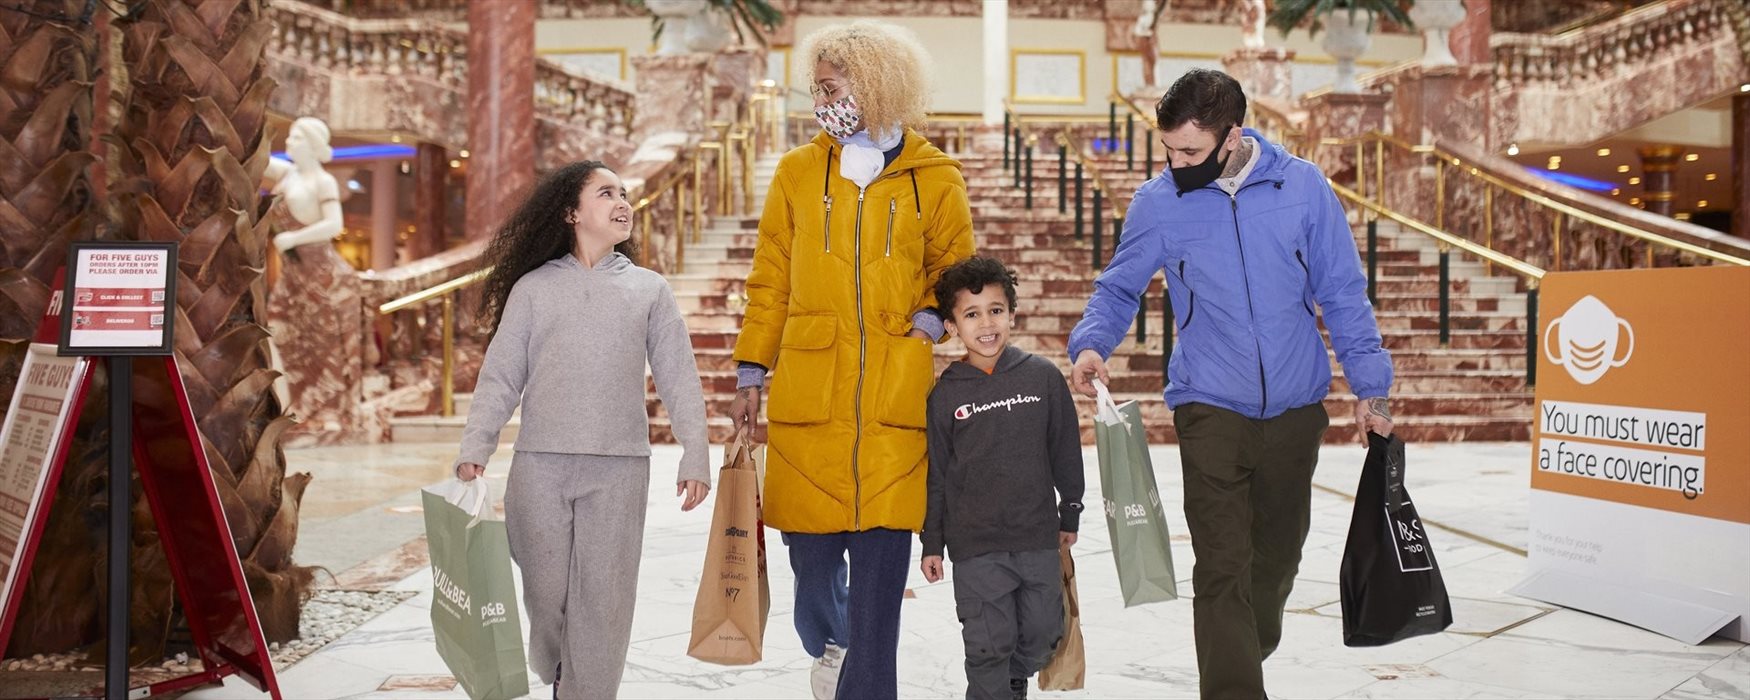 Family shopping at Trafford Centre, Manchester